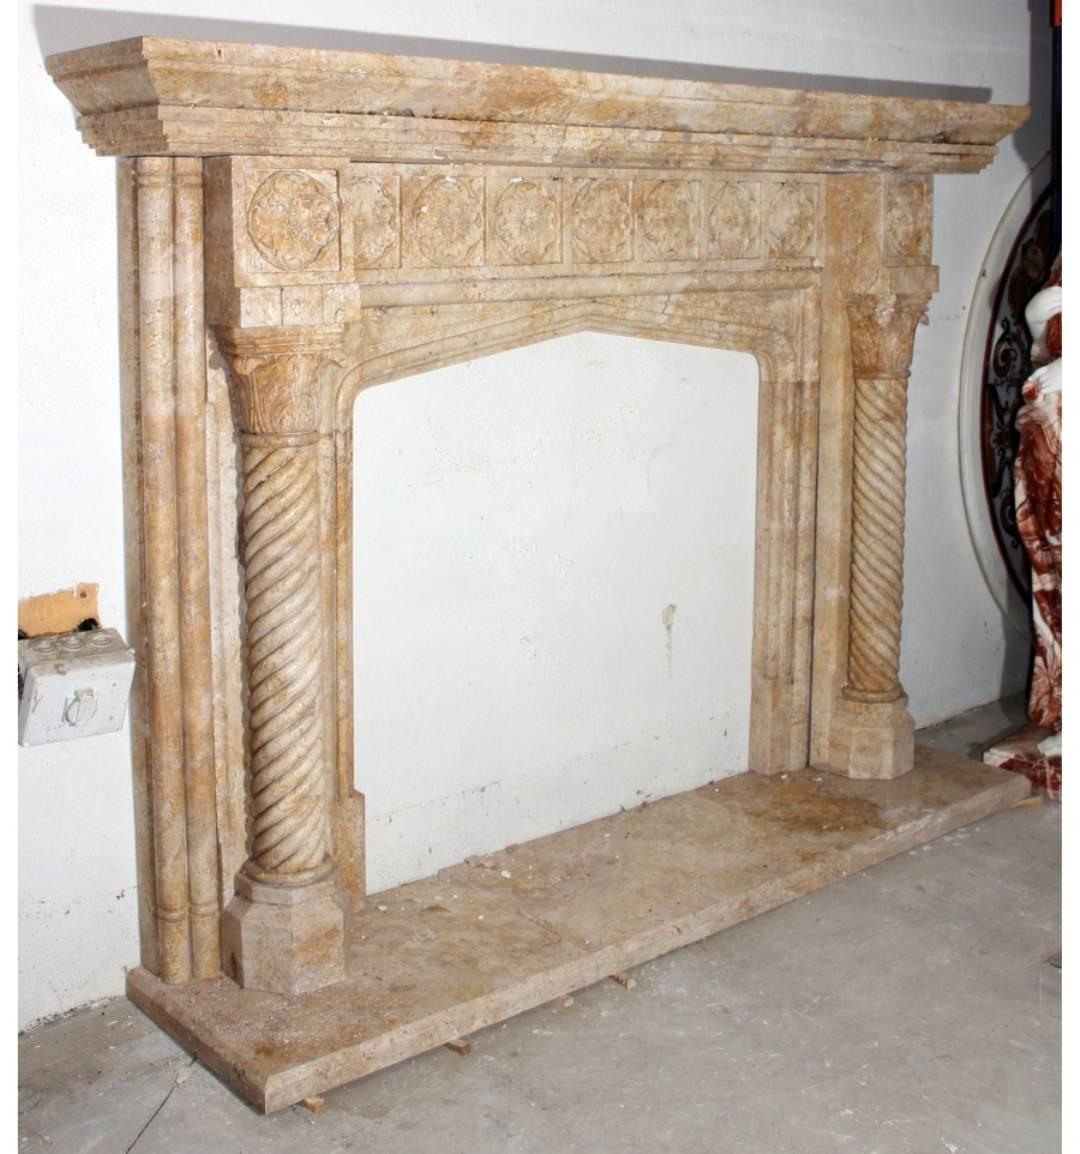 English style fireplace mantel hand-carved in Romano travertine stone. Flanked by two spiral salomonic columns and decorated with flower rosettes bass-relief frieze. 

Interior fireplace measurements: 103 cm x 105 cm.
 